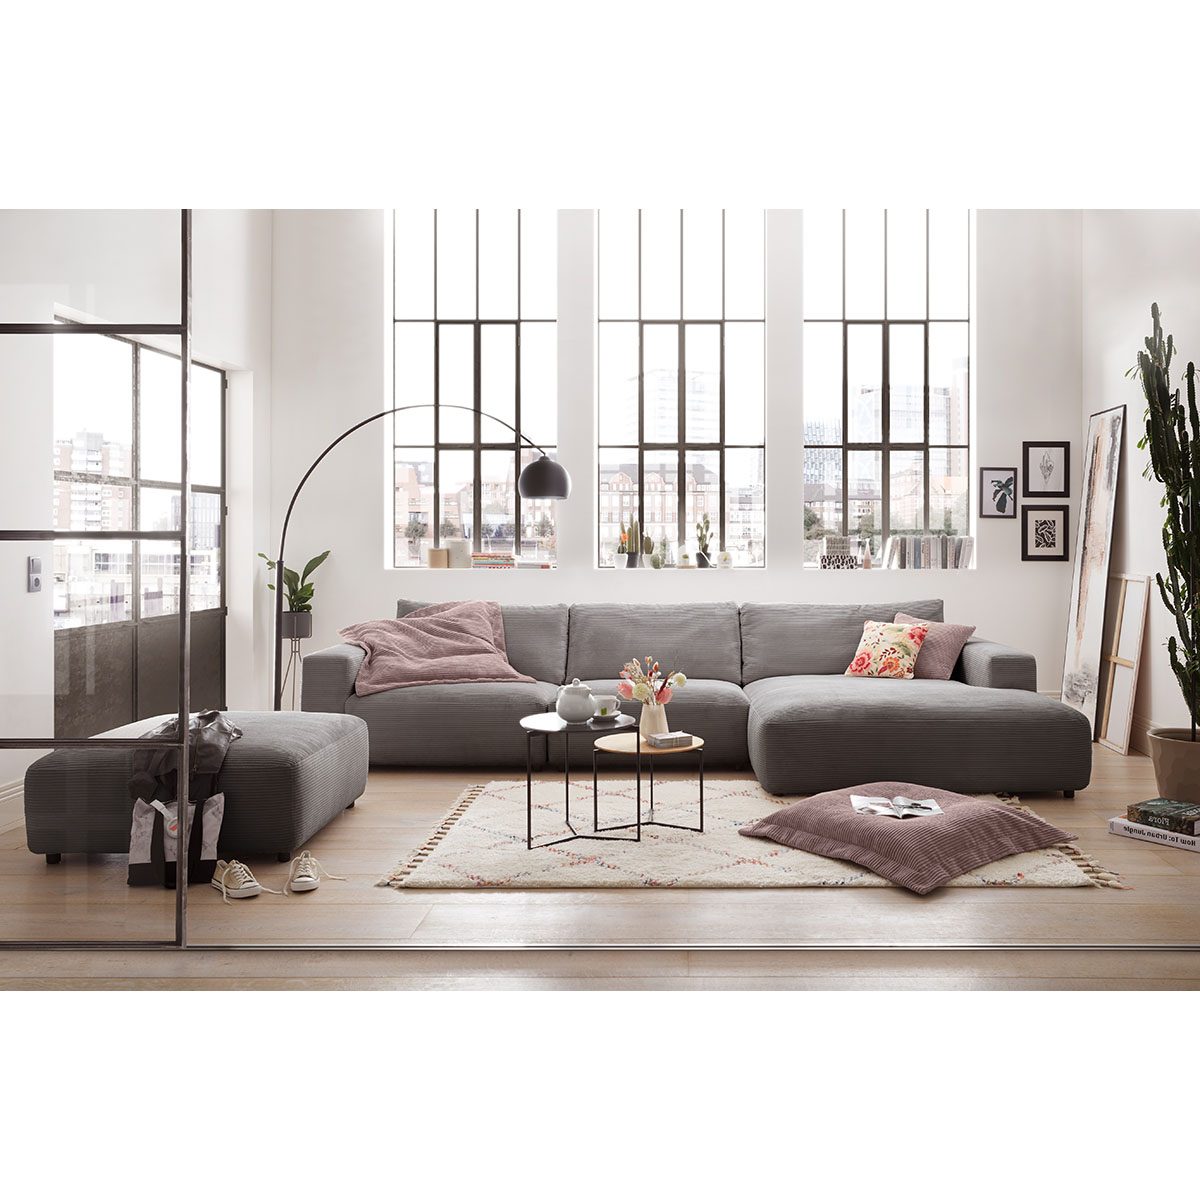 Gallery M branded Musterring Cord 3,5 Sitzer Sofa Lucia by